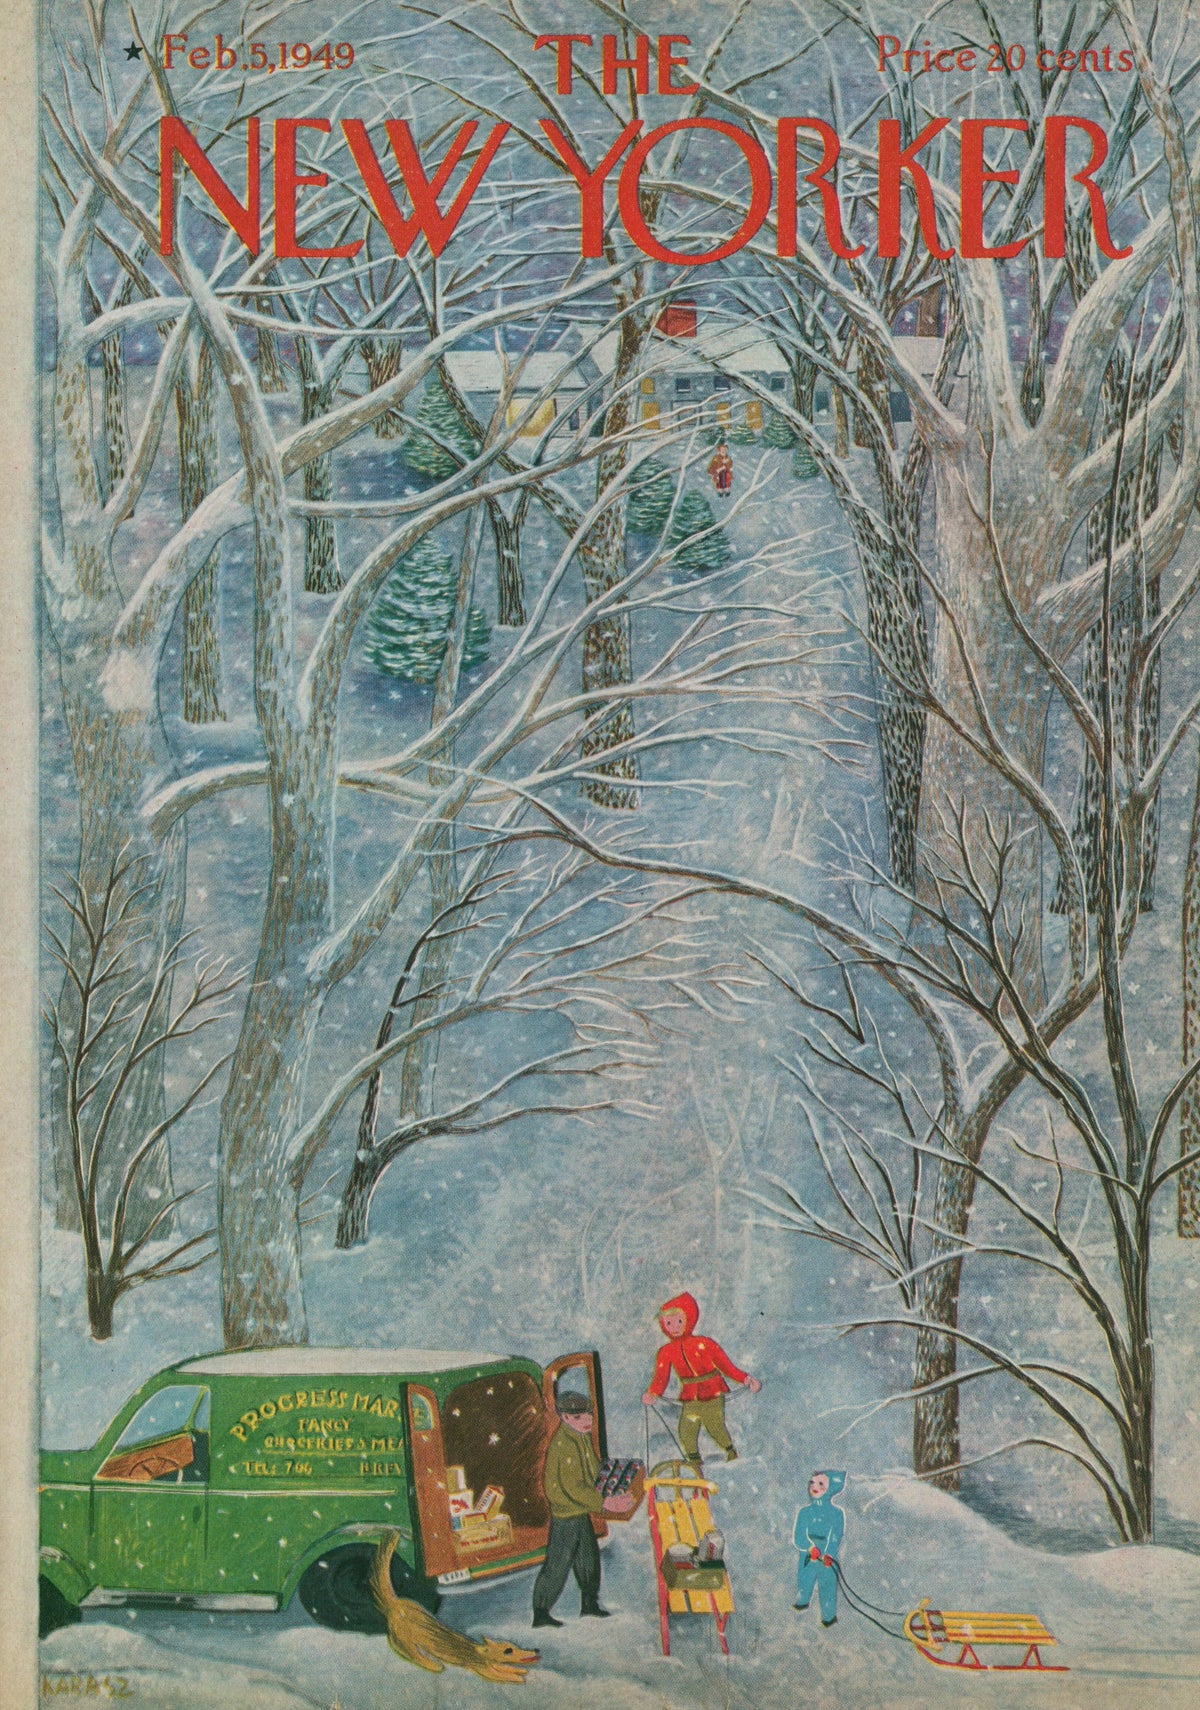 Snow Day- The New Yorker - Authentic Vintage Antique Print